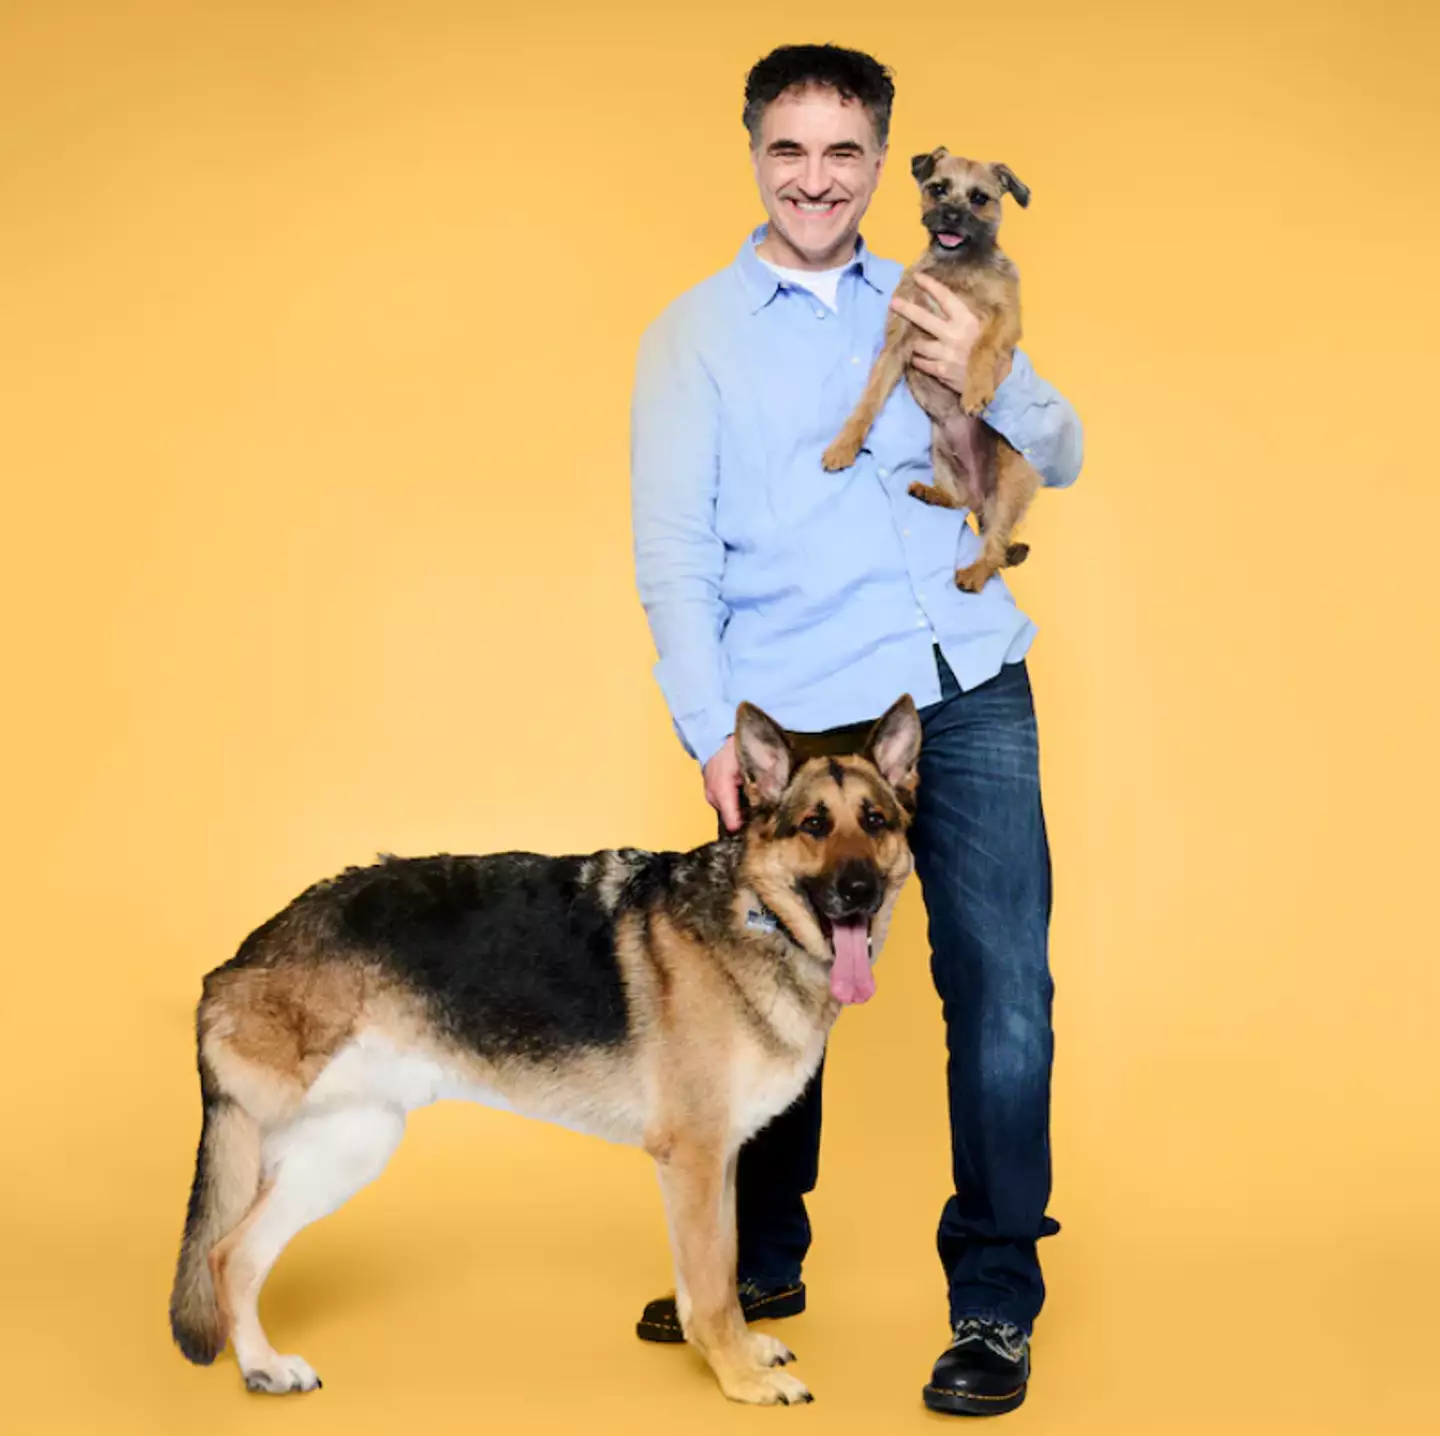 Noel Fitzpatrick is known for his work on Channel 4 series The Supervet. (Channel 4)